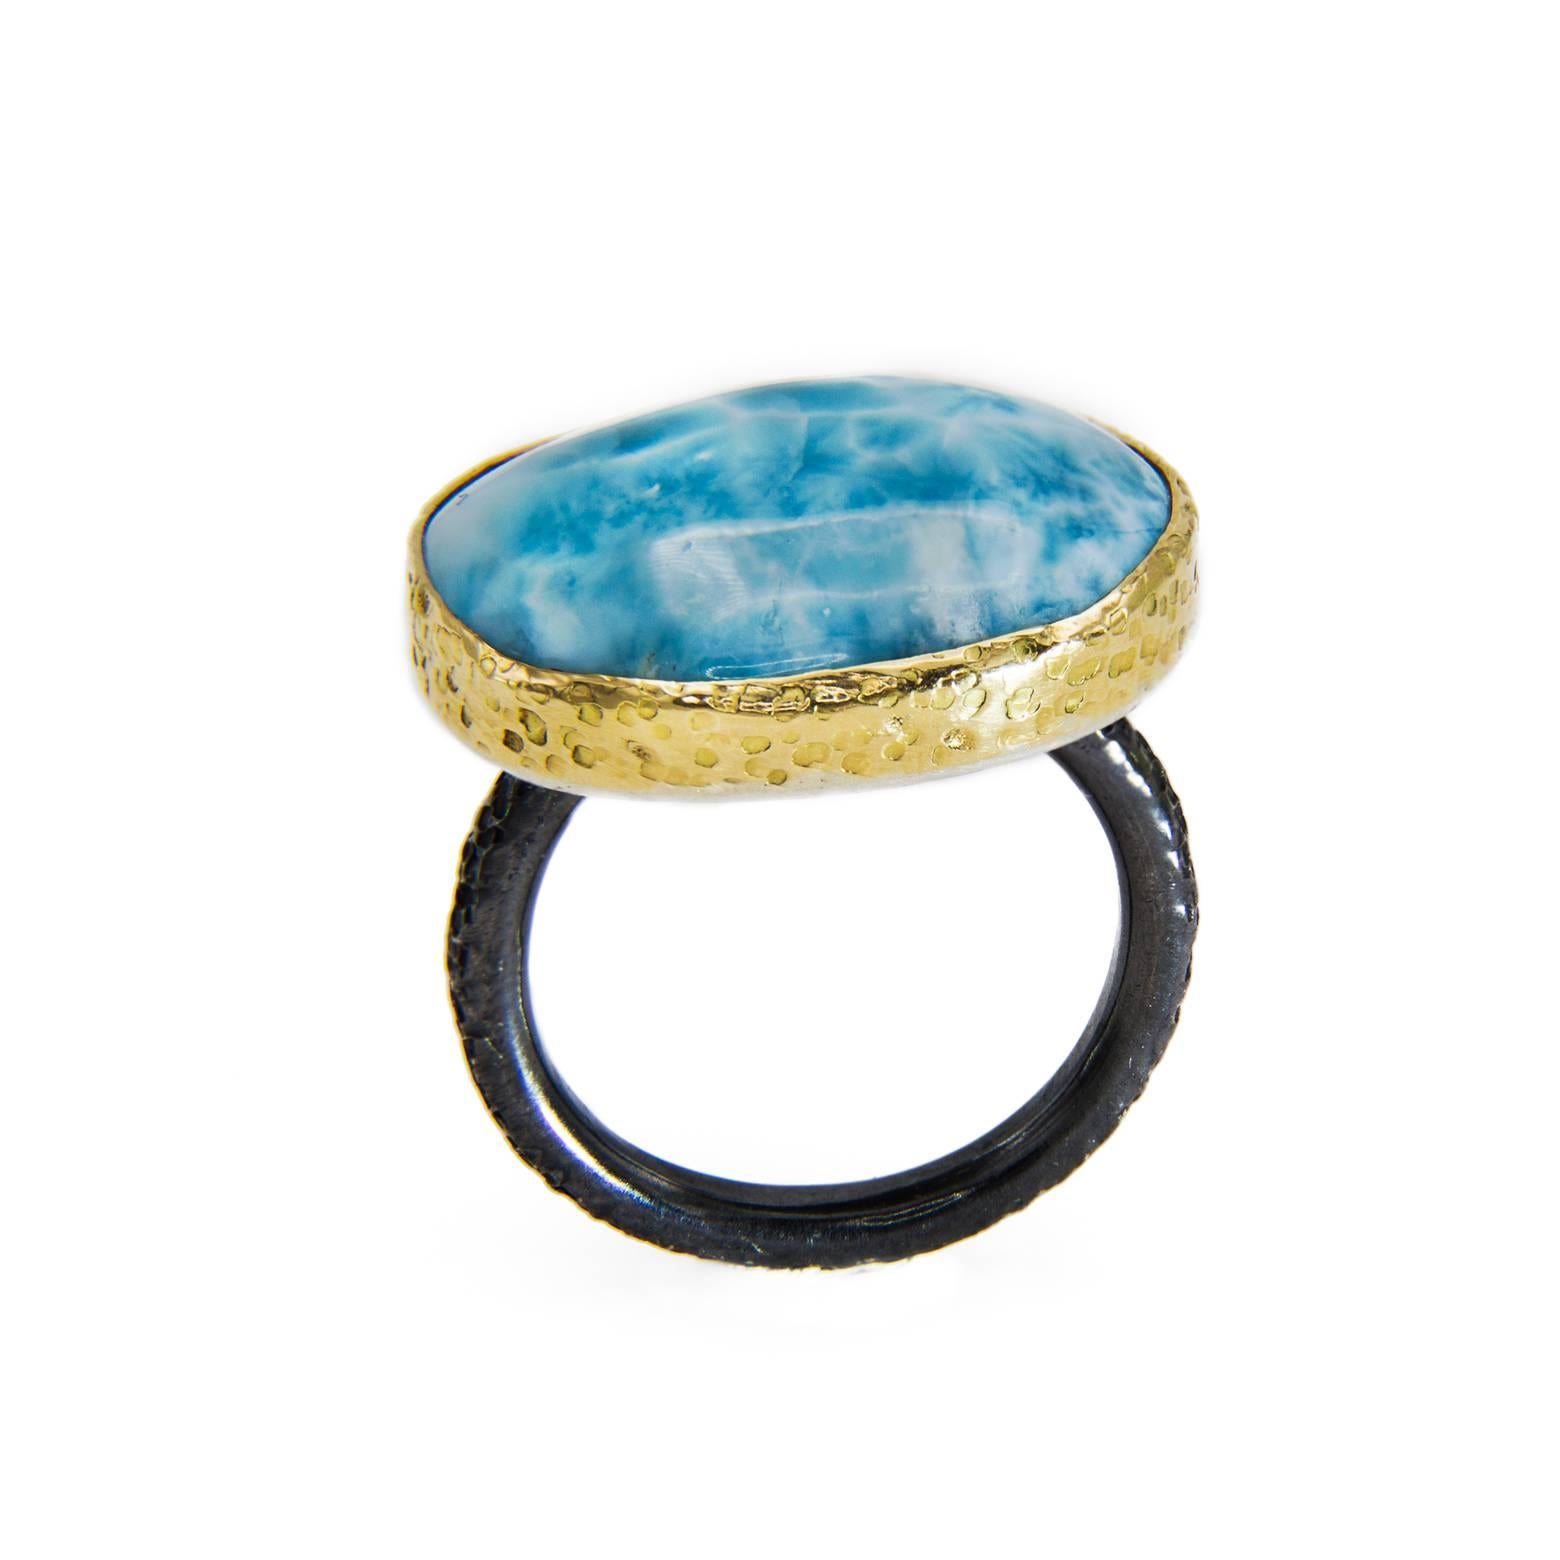 Caribbean ocean swirls and sky blue summer clouds dance in this gorgeous larimar ring. Your imagination is fancied and your daydreams expand as you adorn yourself in paradise. Larimar is said to assist in self expression, patience, acceptance,